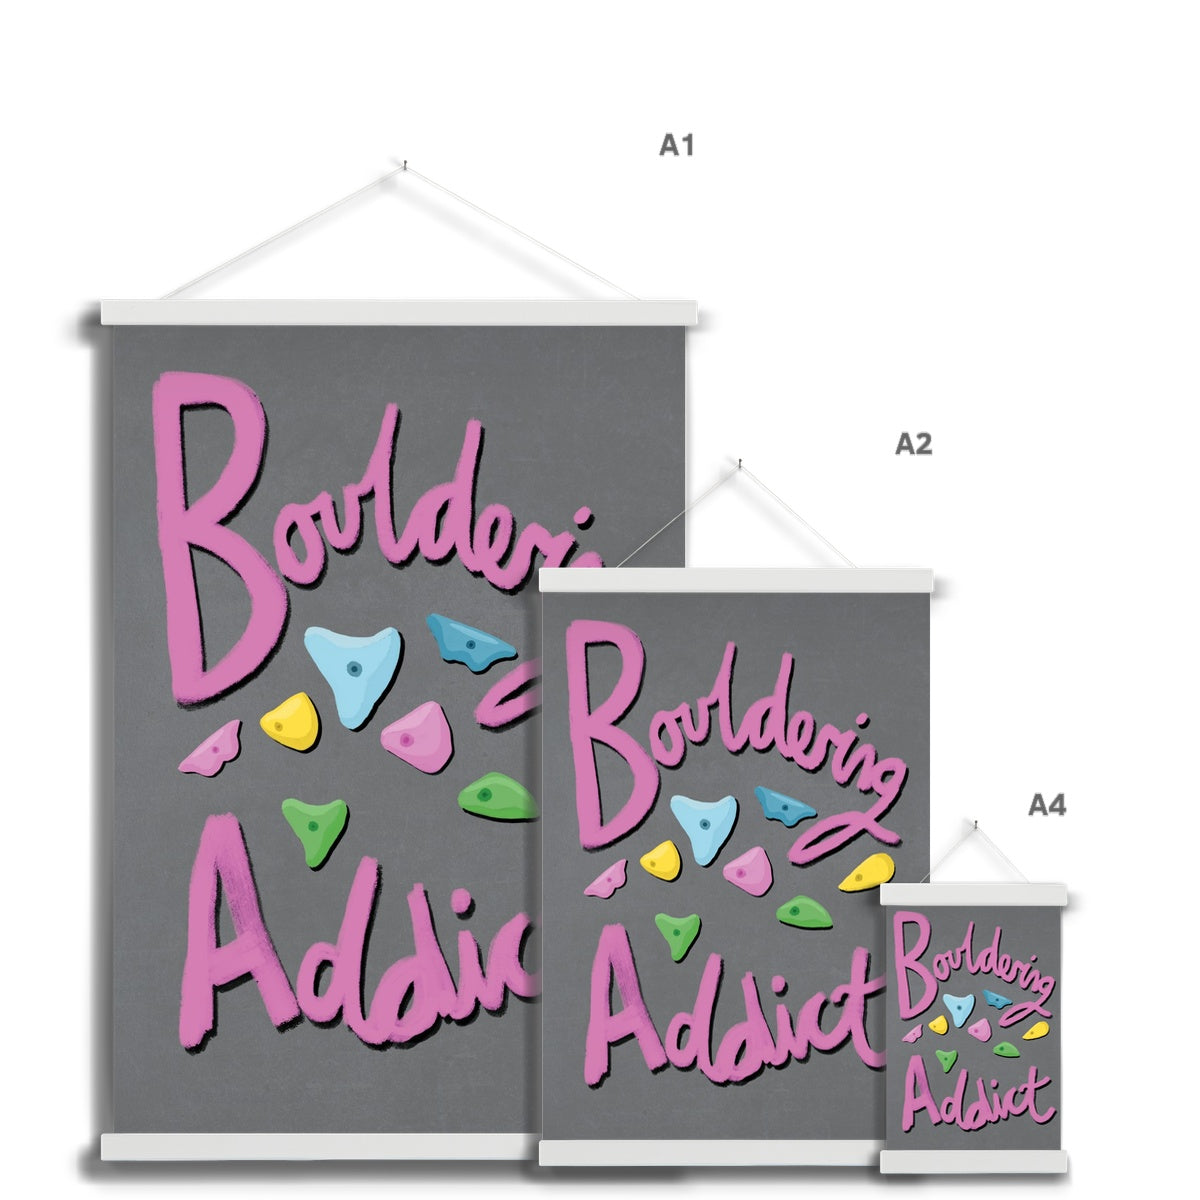 Bouldering Addict - Light Grey and Pink Fine Art Print with Hanger